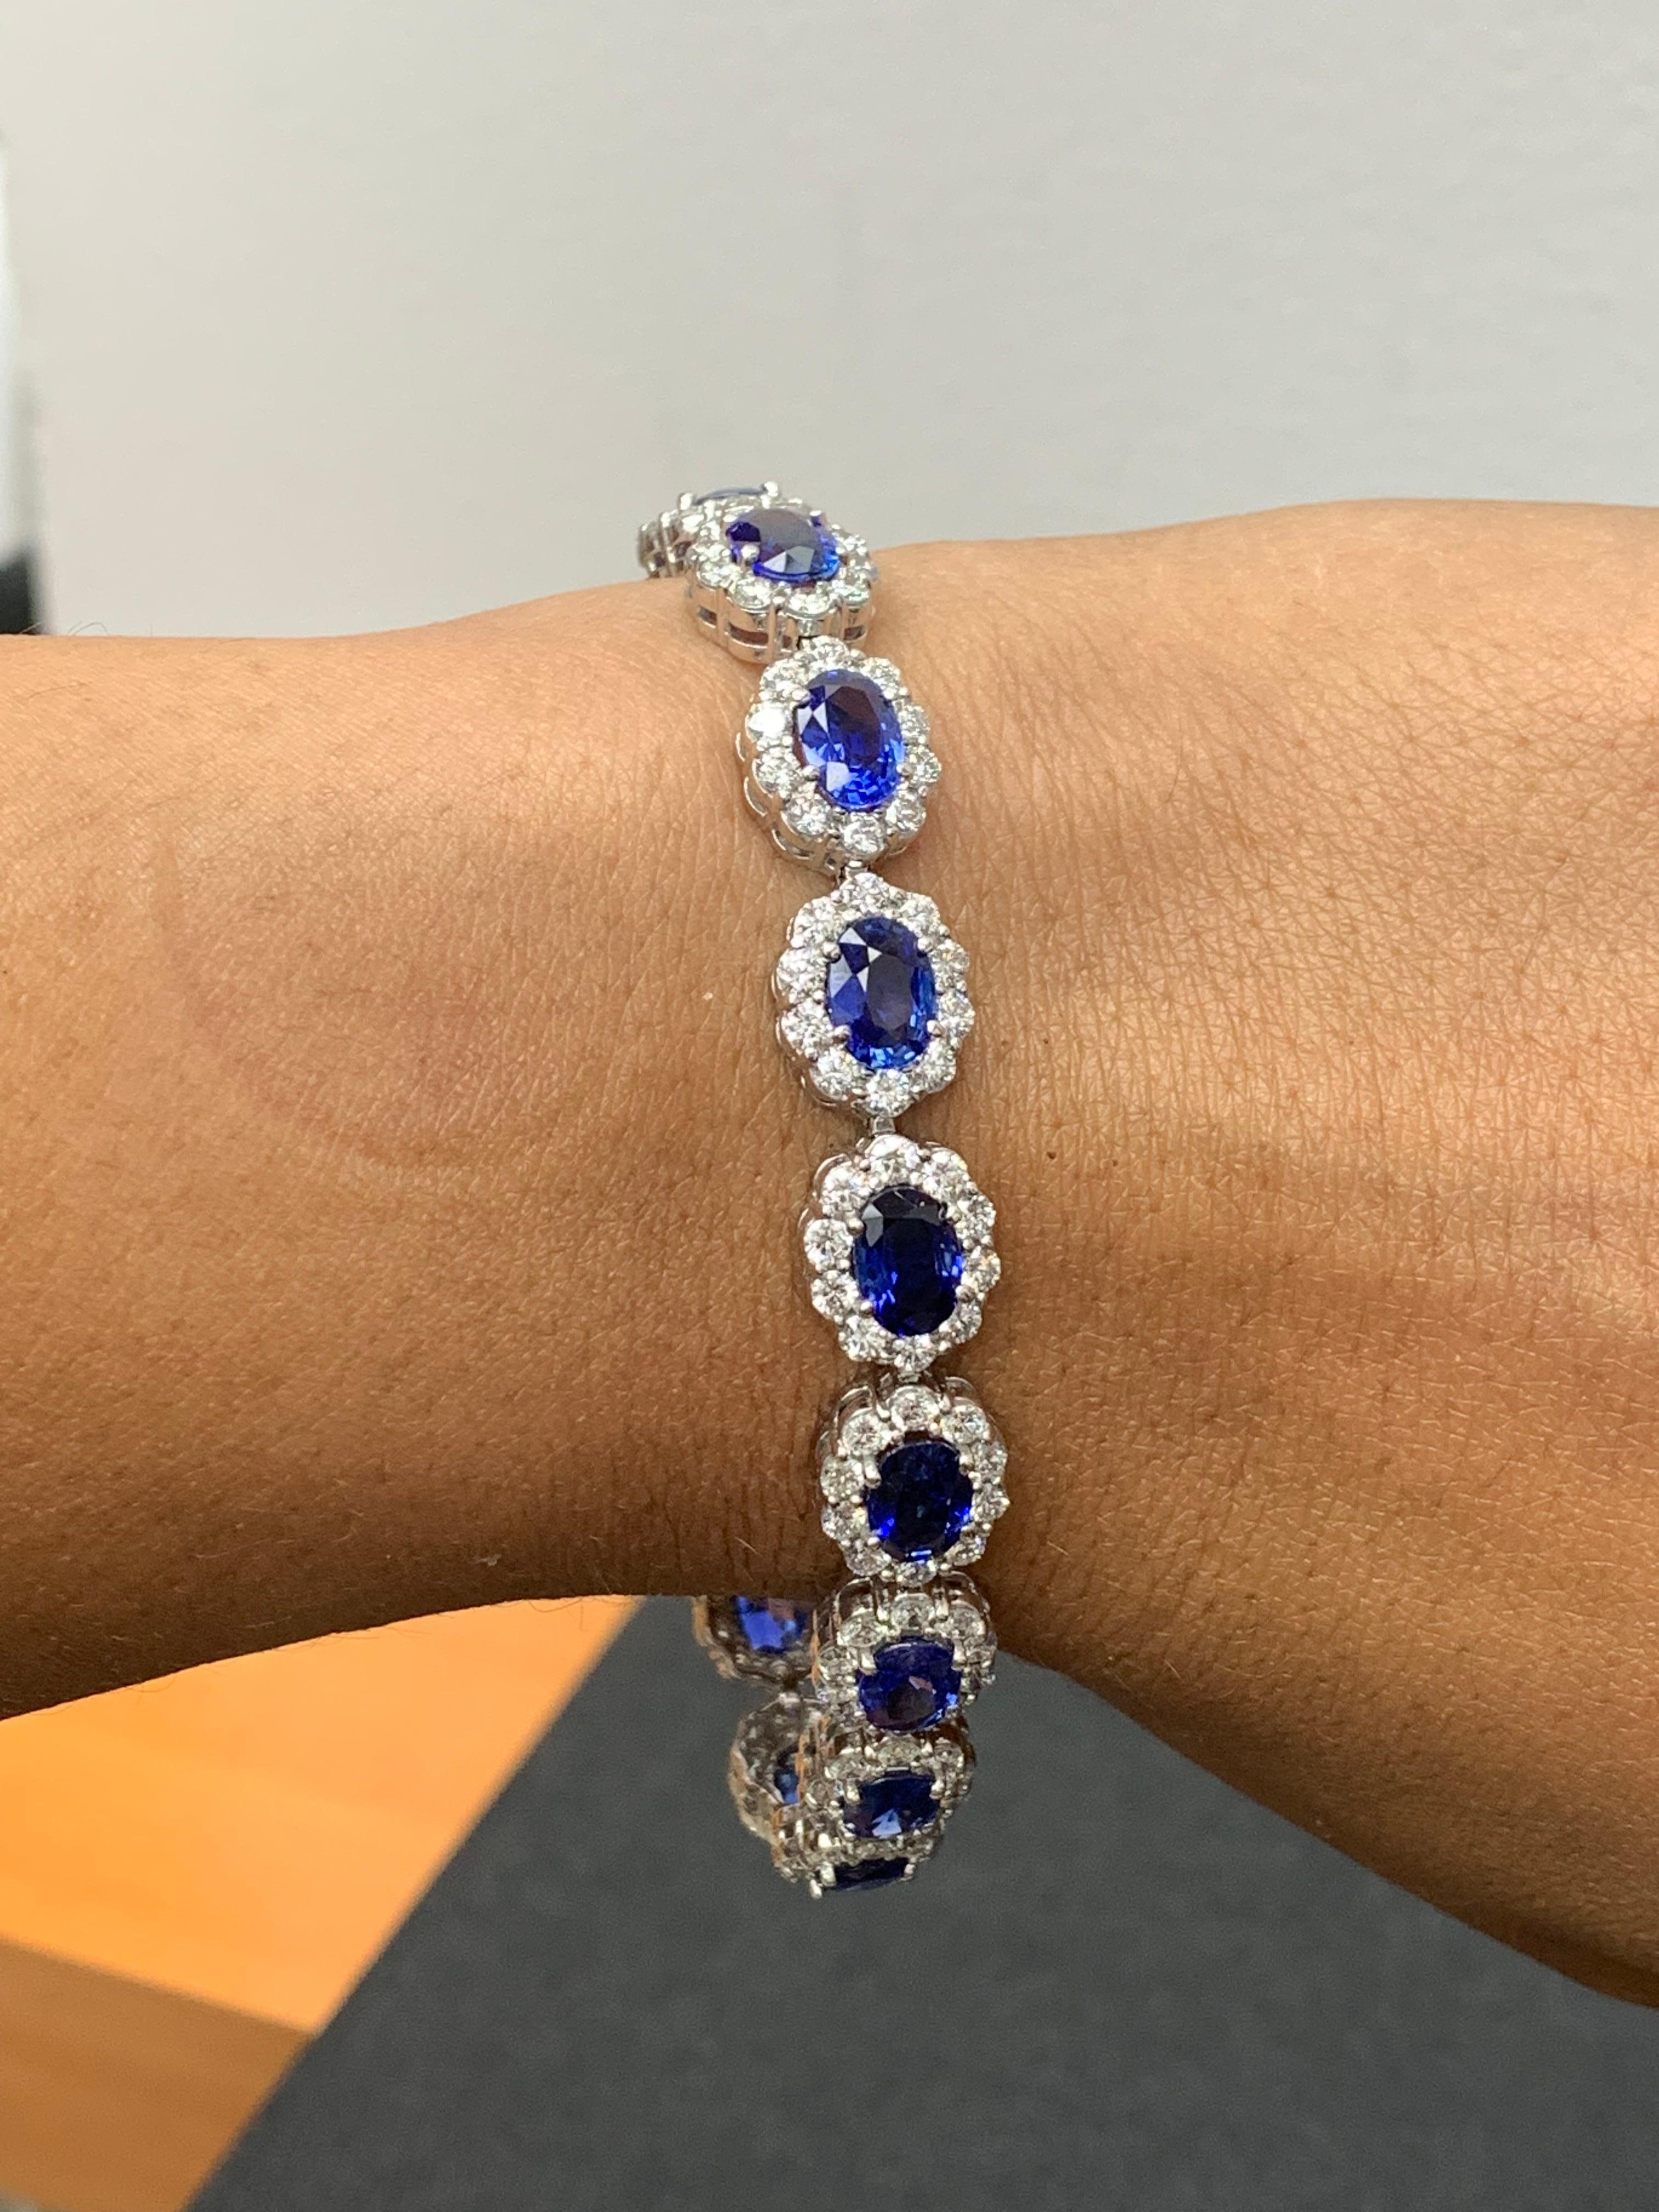 13.88 Carat Oval Cut Blue Sapphire and Diamond Halo Bracelet in 14K White Gold For Sale 2